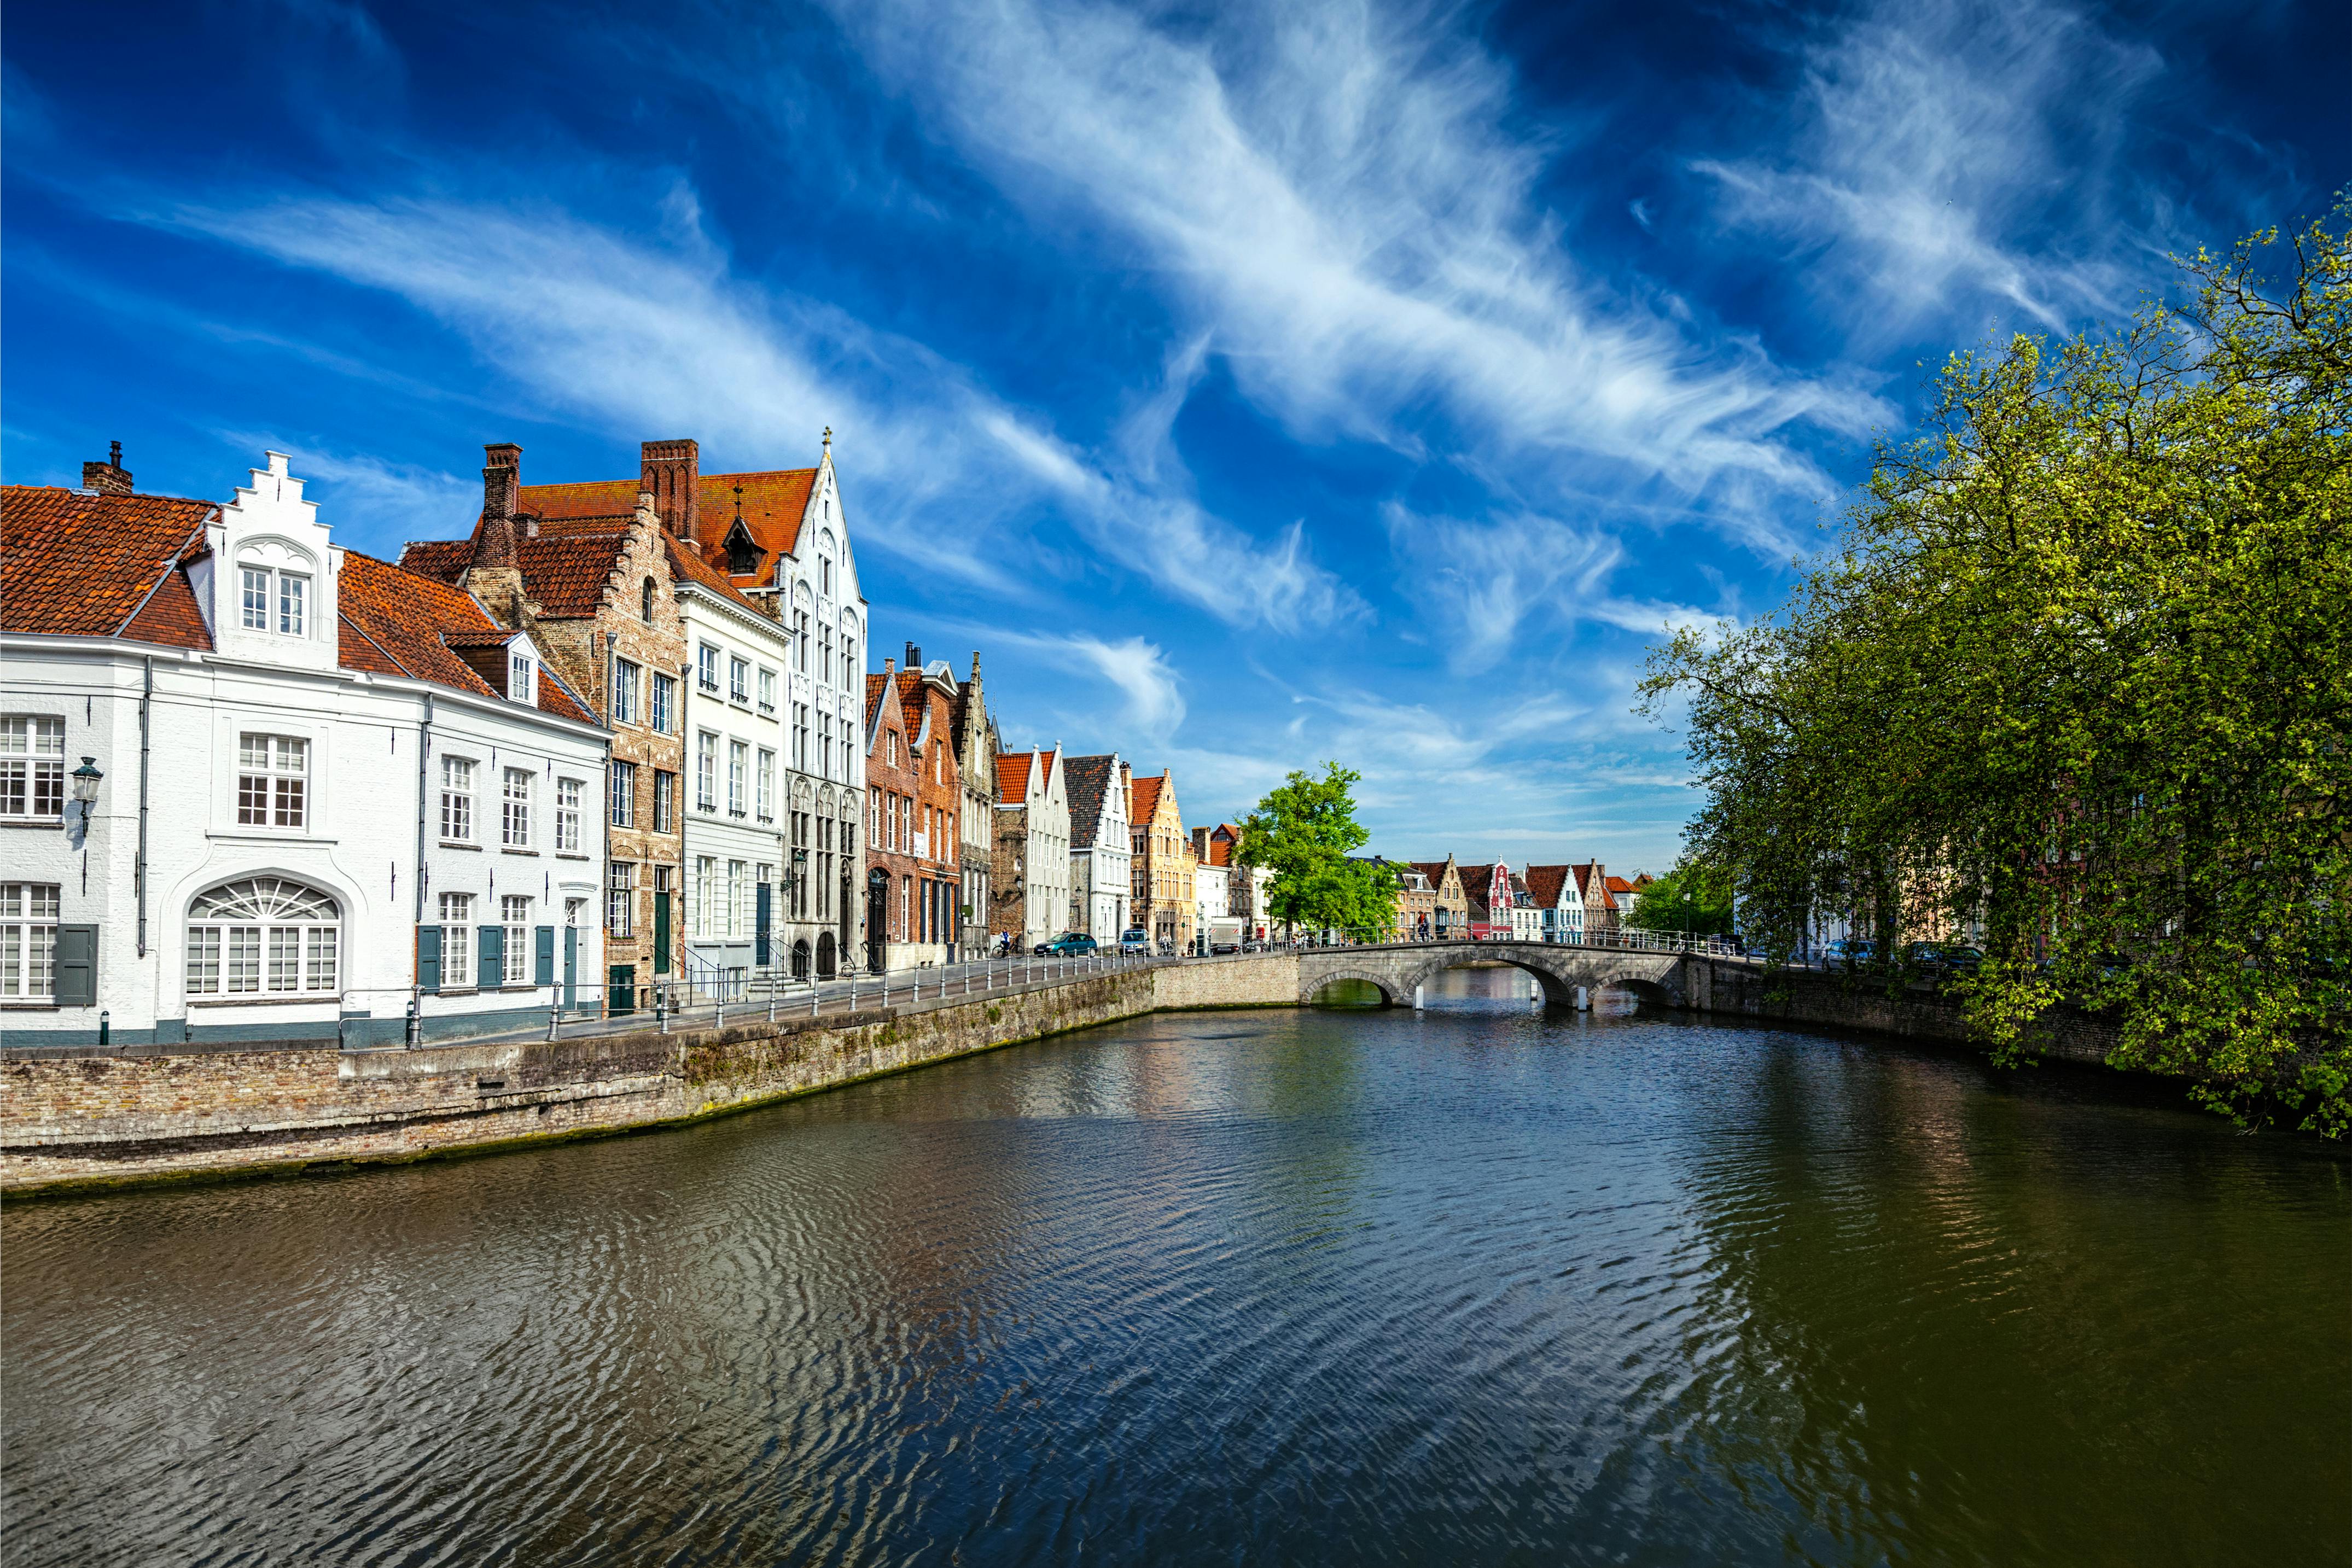 Bruges bus tour from Brussels